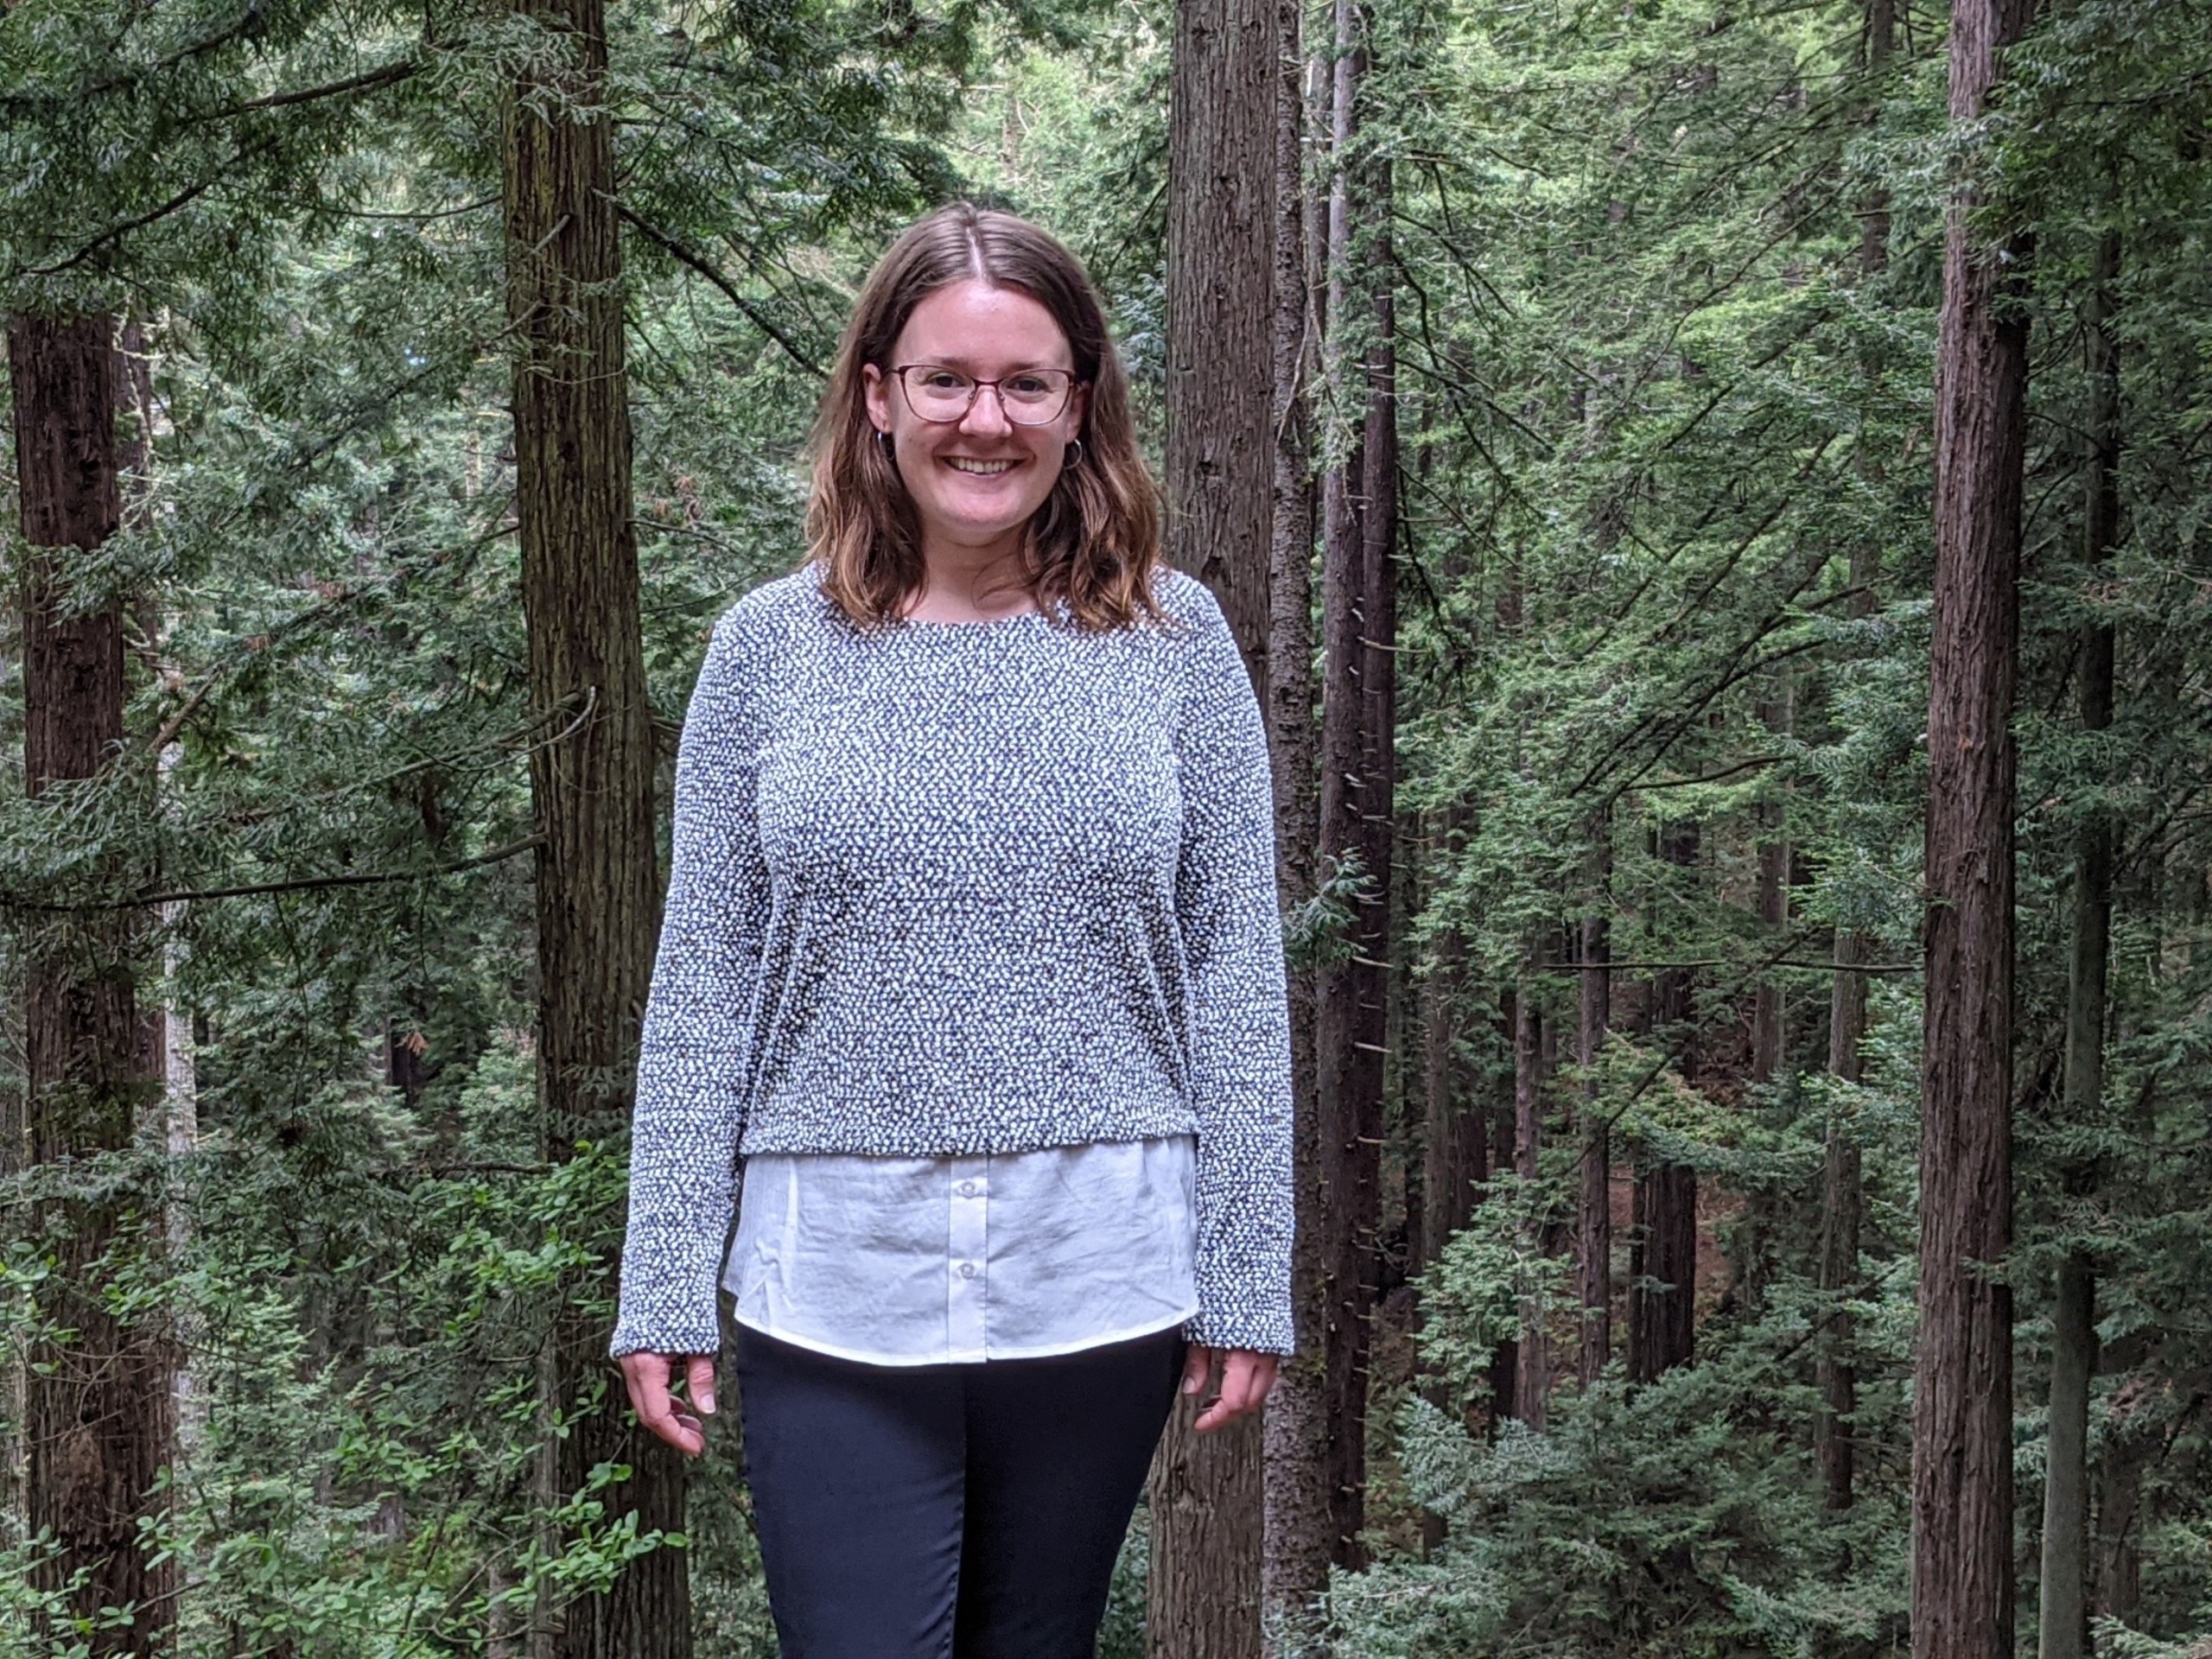 Sarah Moschetti standing in front of redwood trees in the forest.